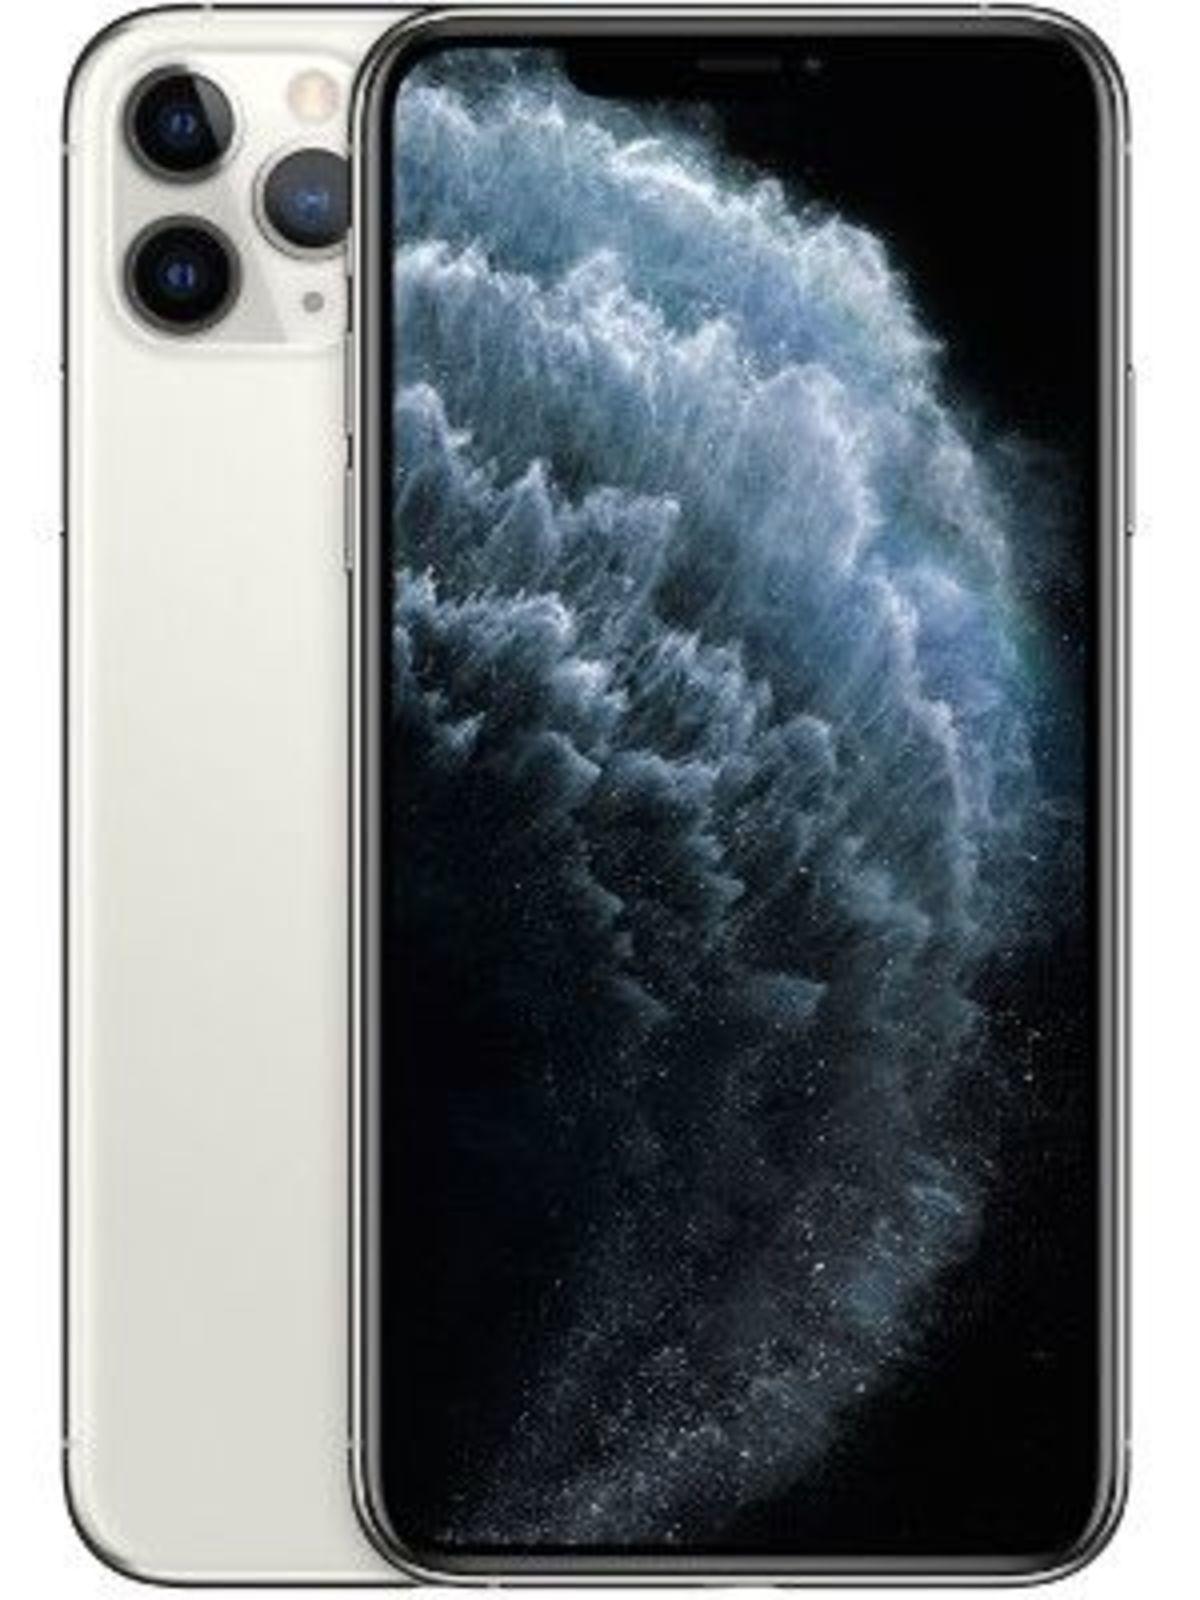 Apple Iphone 11 Pro Max 512gb Price In India Full Specifications 24th Jul 22 At Gadgets Now